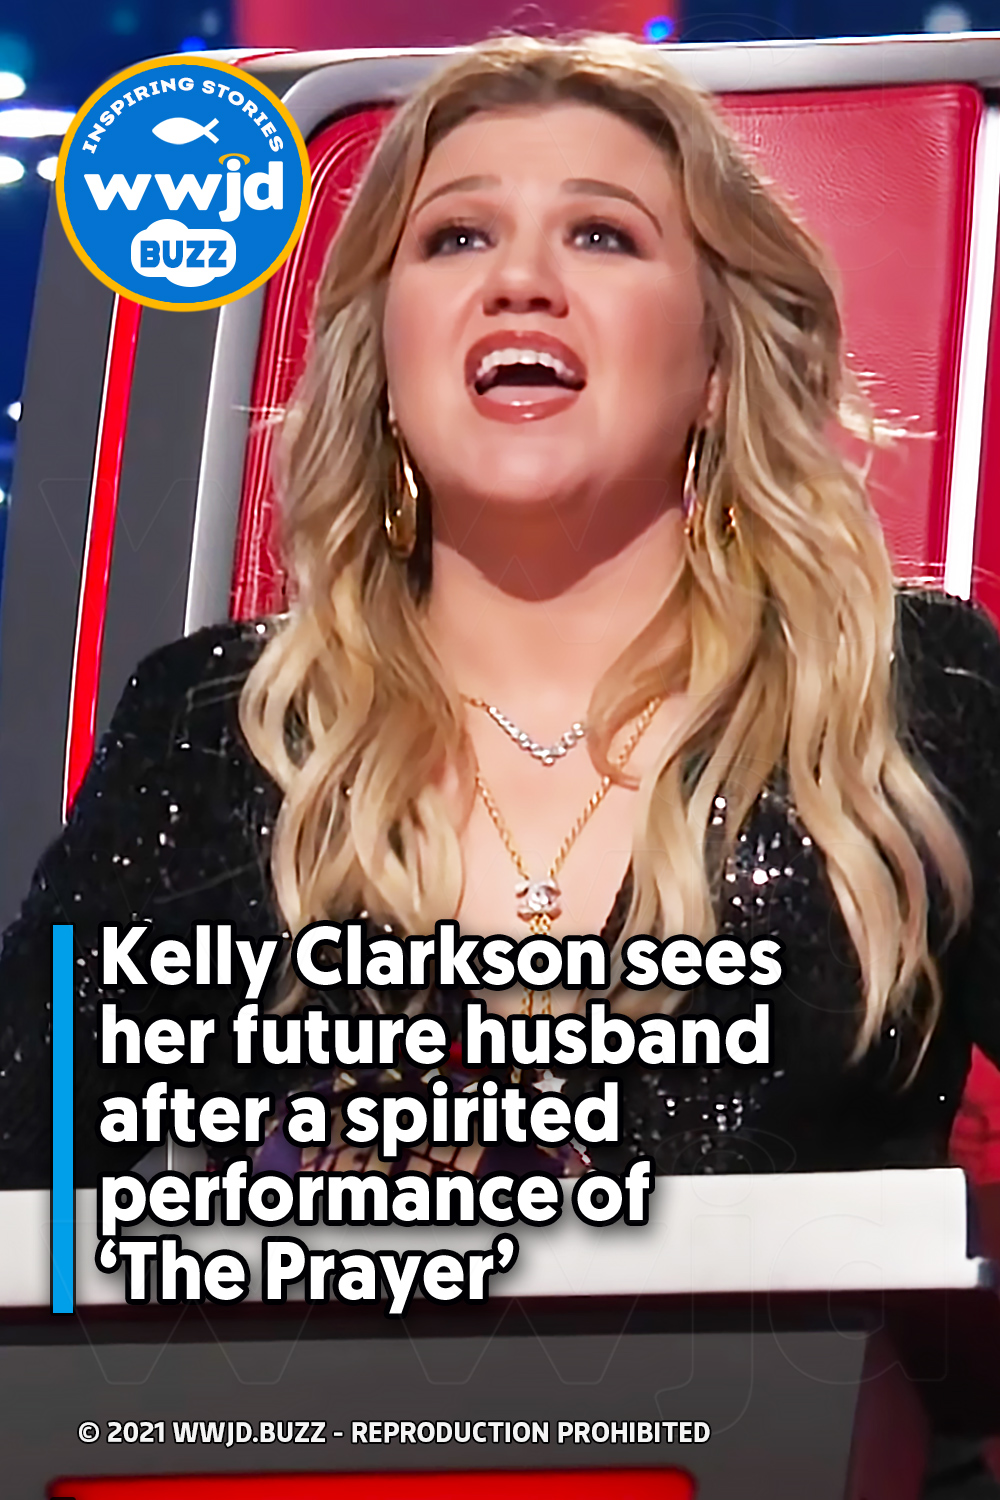 Kelly Clarkson sees her future husband after a spirited performance of ‘The Prayer’